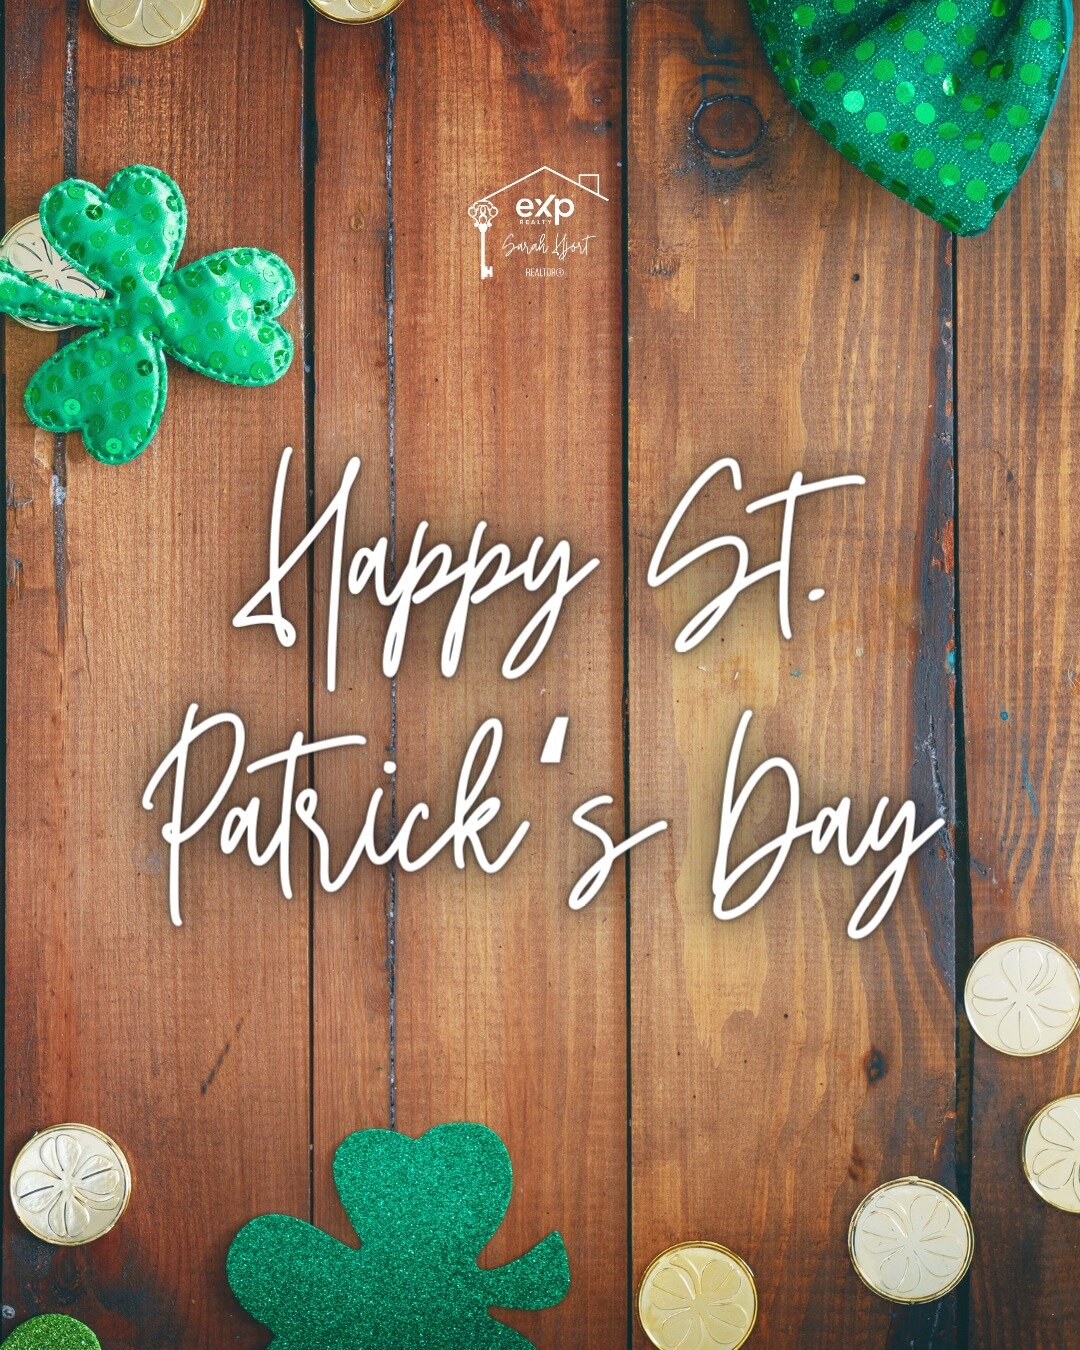 Happy St. Patrick's Day!

May your day be filled with laughter, good cheer and a touch of Irish luck!

#stpatricksday #yourstorybeginshere #homeownership #homebuyer #realestateexpert #buyorsellwithme #northeastohiorealtor #neohiorealestate #parmareal